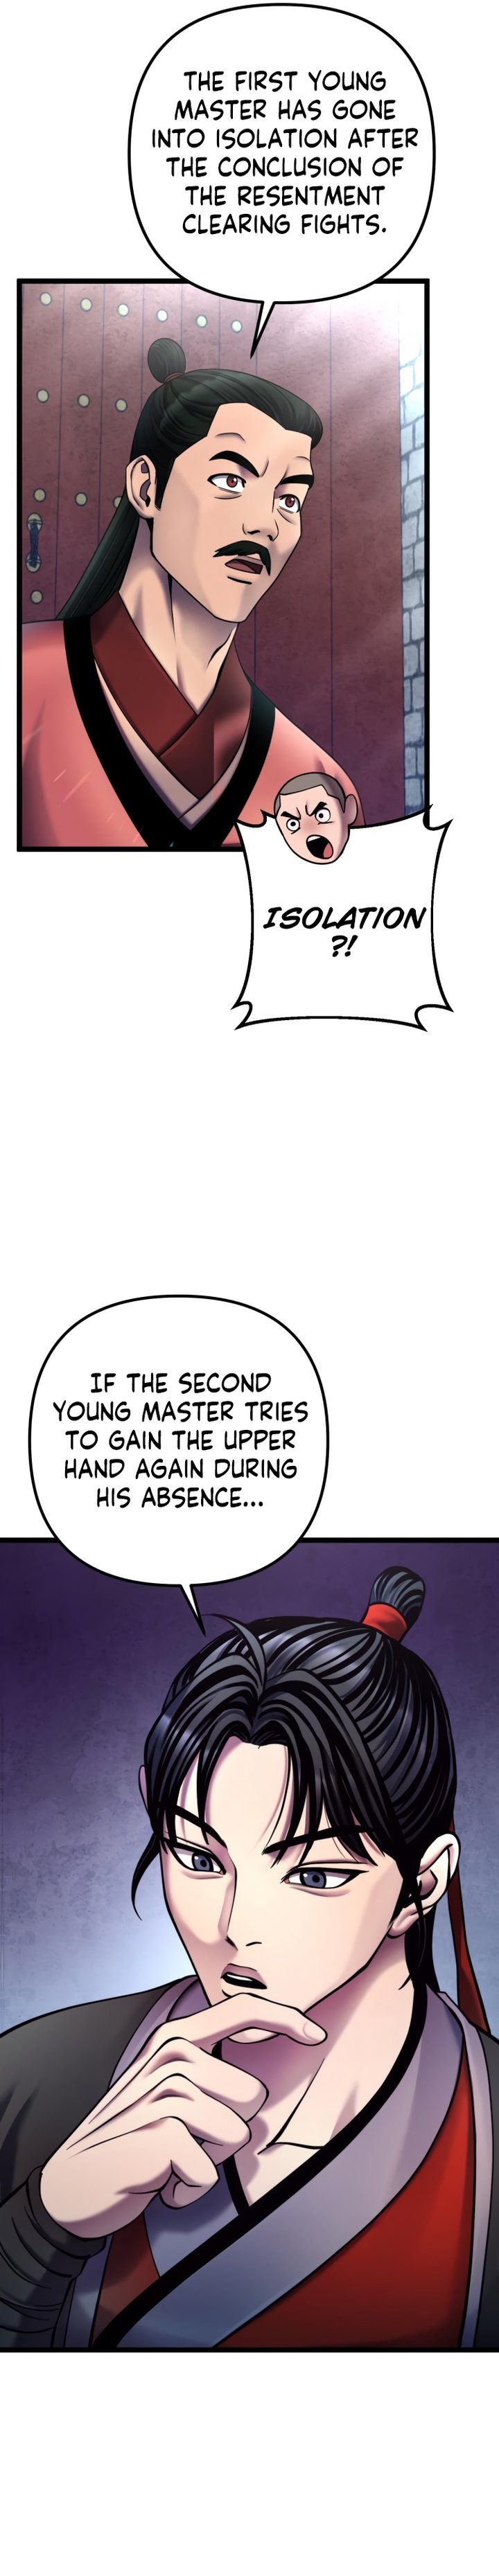 Revenge Of Young Master Peng Chapter 82 Page 3